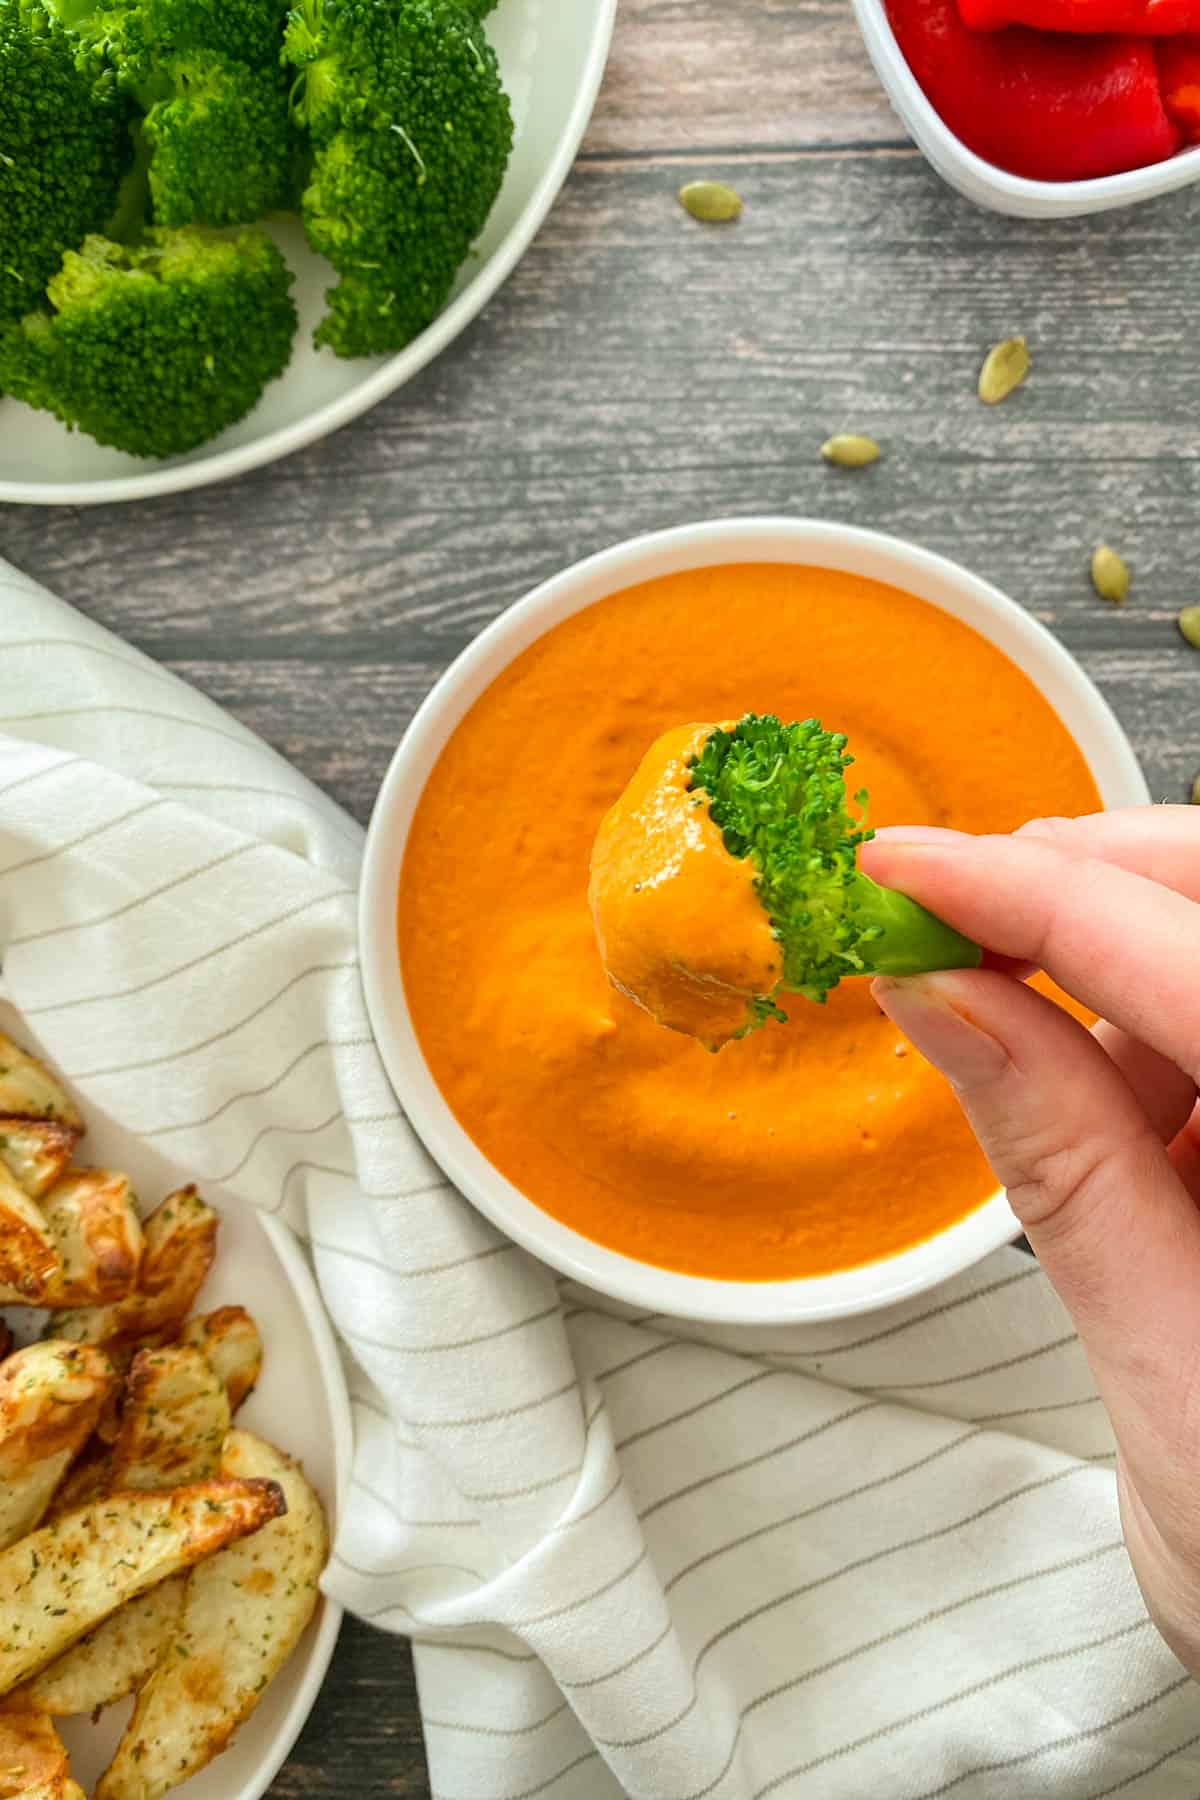 Hand holding broccoli floret dunked in vegan cheese sauce with bowl below.